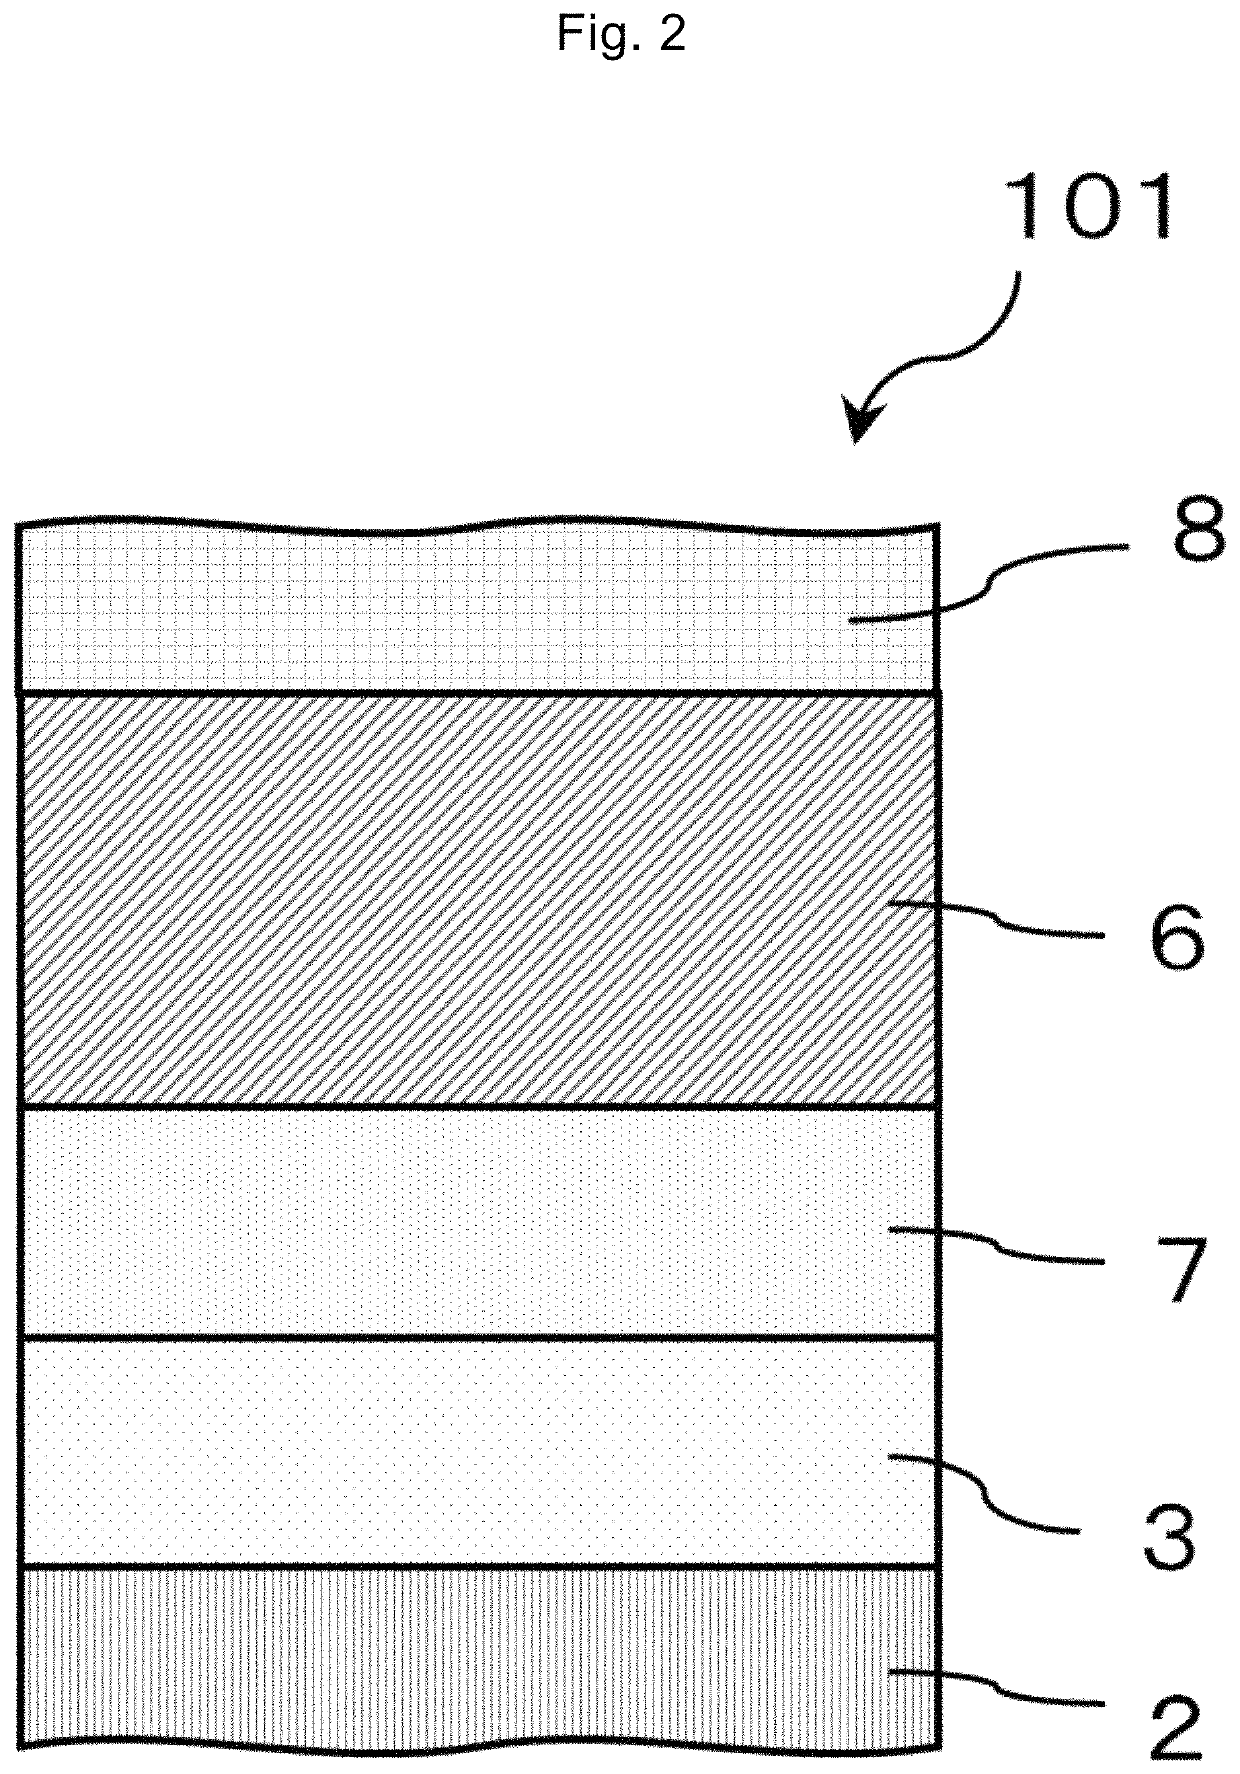 Precursor structure of perpendicularly magnetized film, perpendicularly magnetized film structure and method for manufacturing the same, perpendicular magnetization-type magnetic tunnel junction film in which said structure is used and method for manufacturing the same, and perpendicular magnetization-type magnetic tunnel junction element in which said structure or magnetic tunnel junction film is used